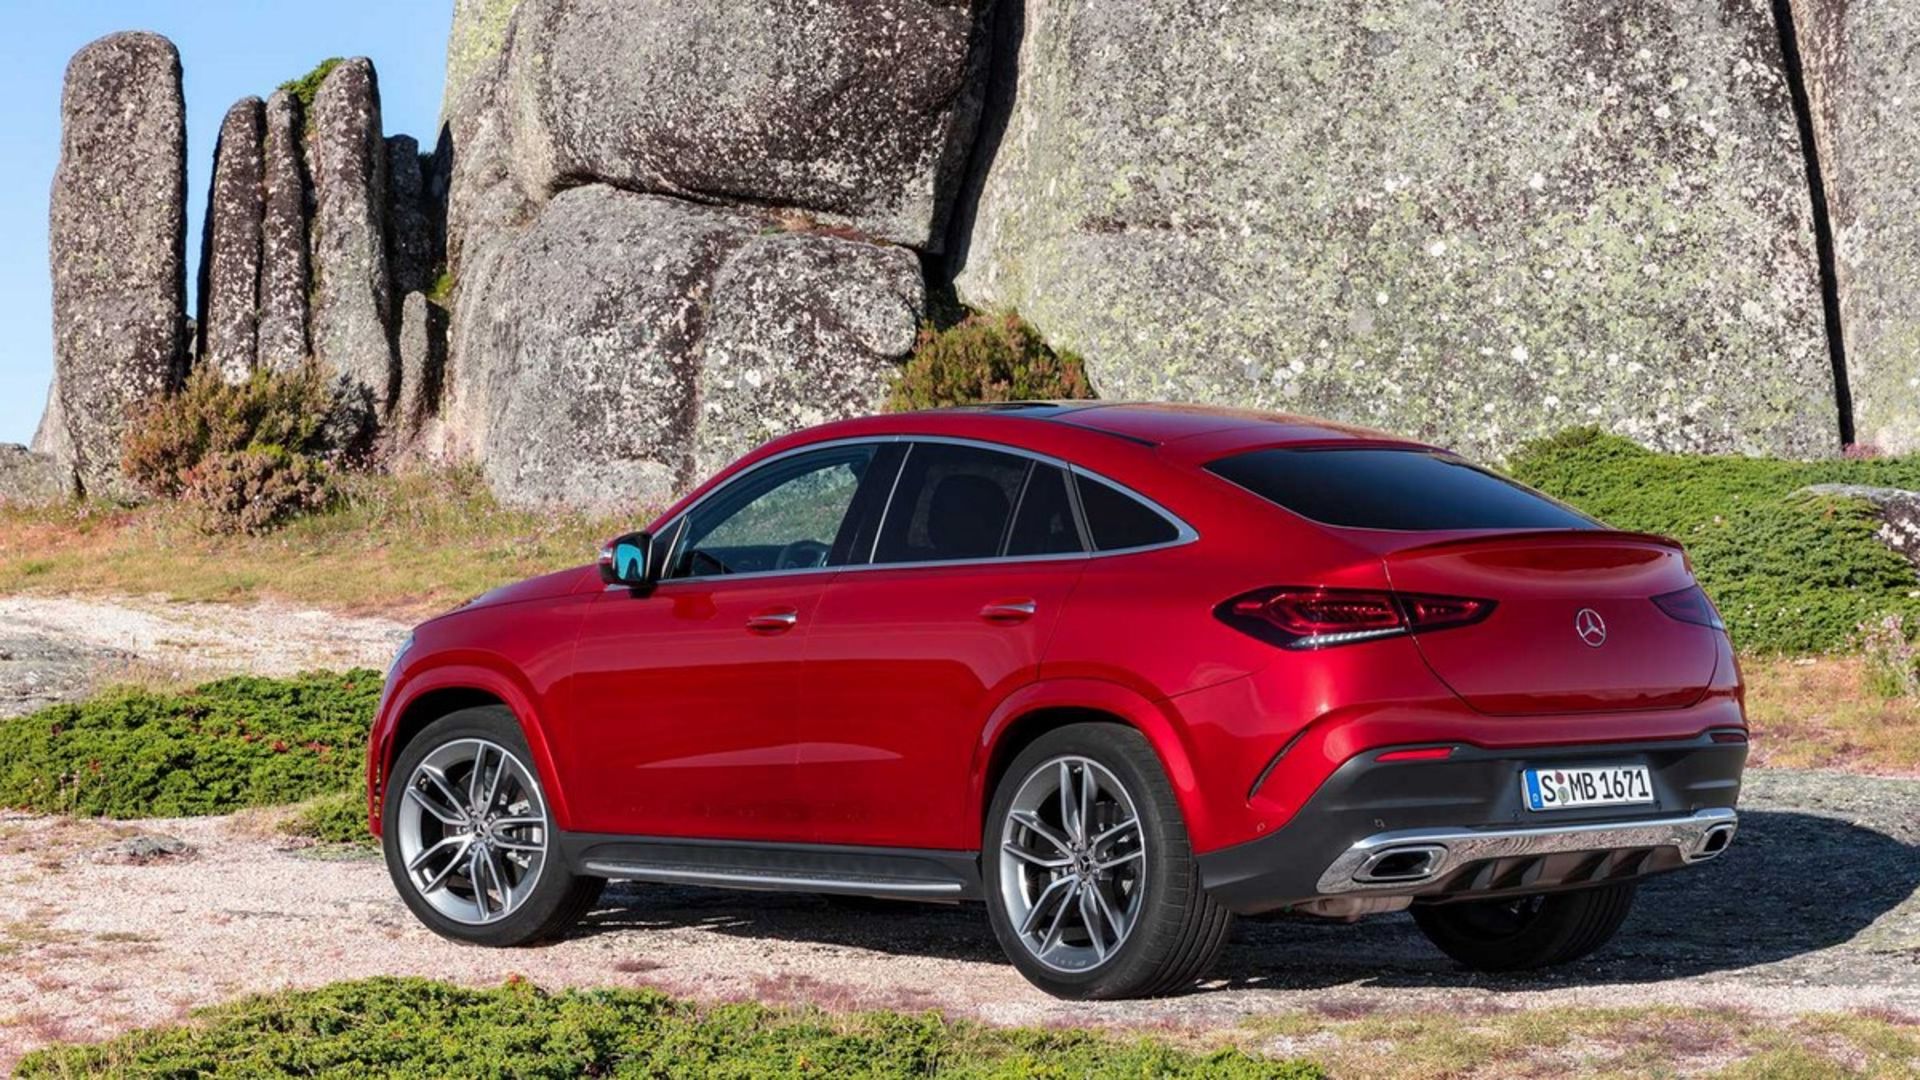 Mercedes GLE Coupe (2019)